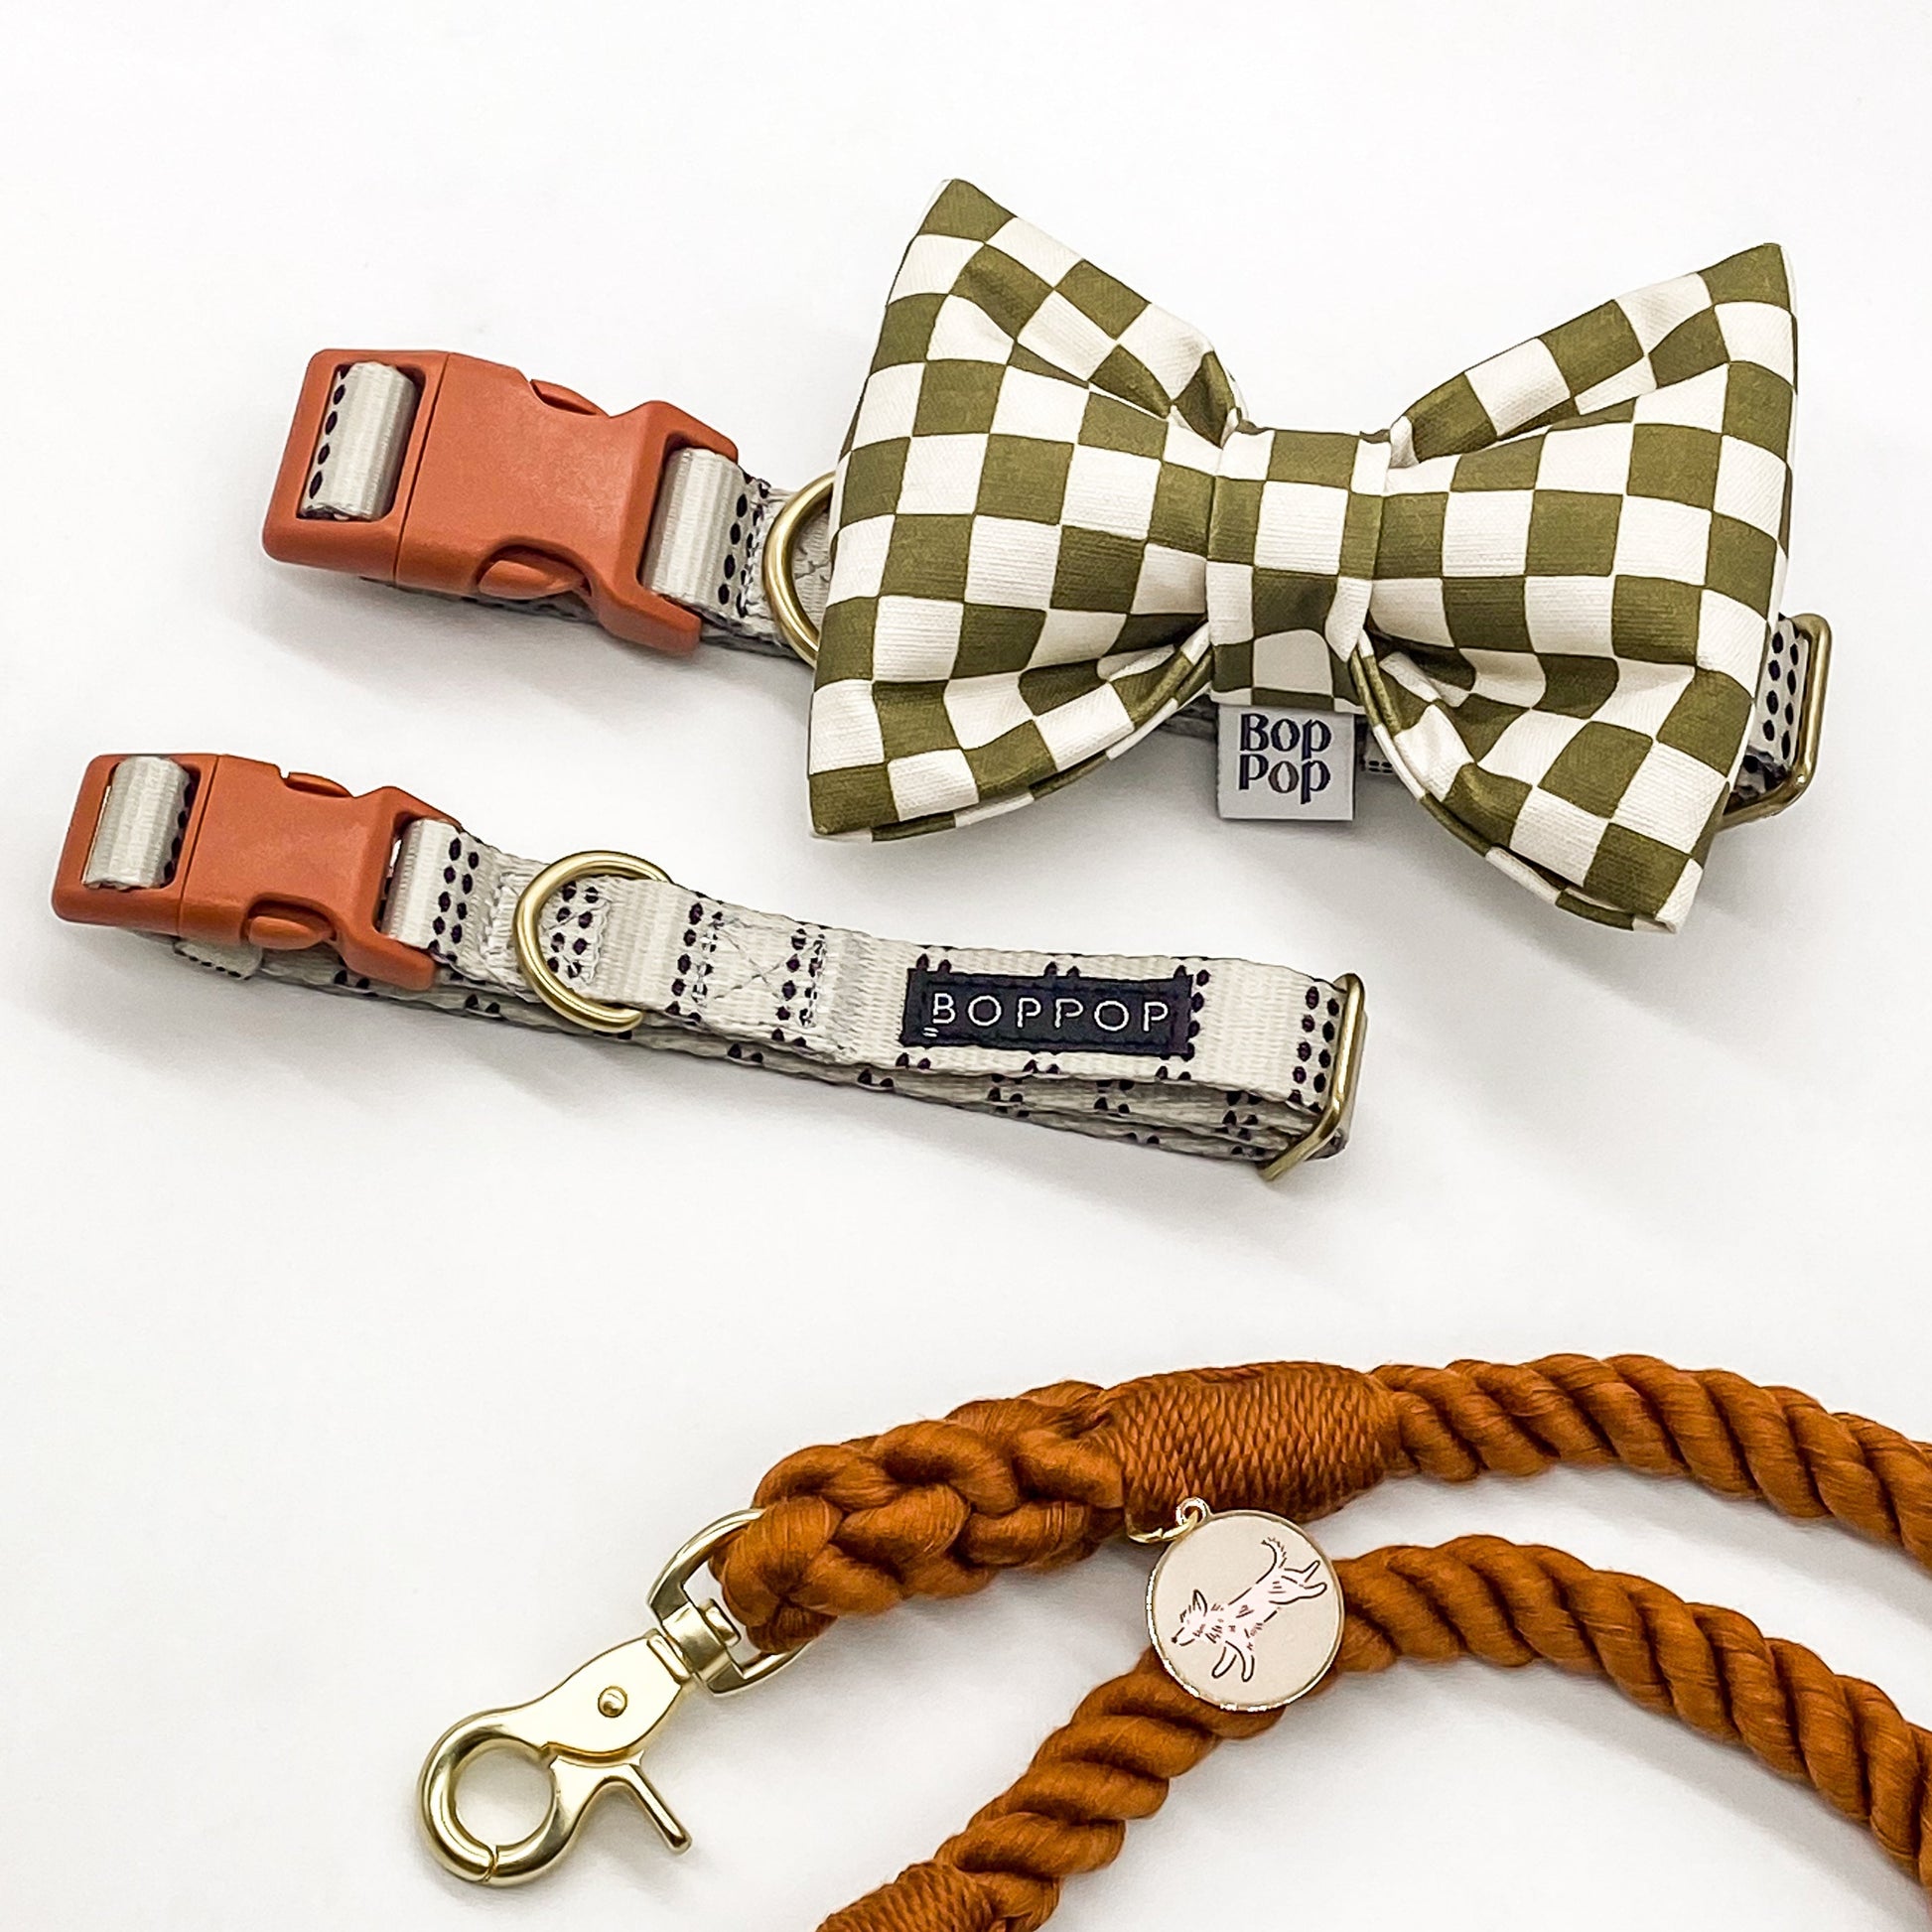 BIG giant dog cat bow tie olive green checkerboard puffy large sized dog accessory Bop Pop Pets dog collars sienna grey nylon and handsfree clay rust long rope leash with brass gold hardware